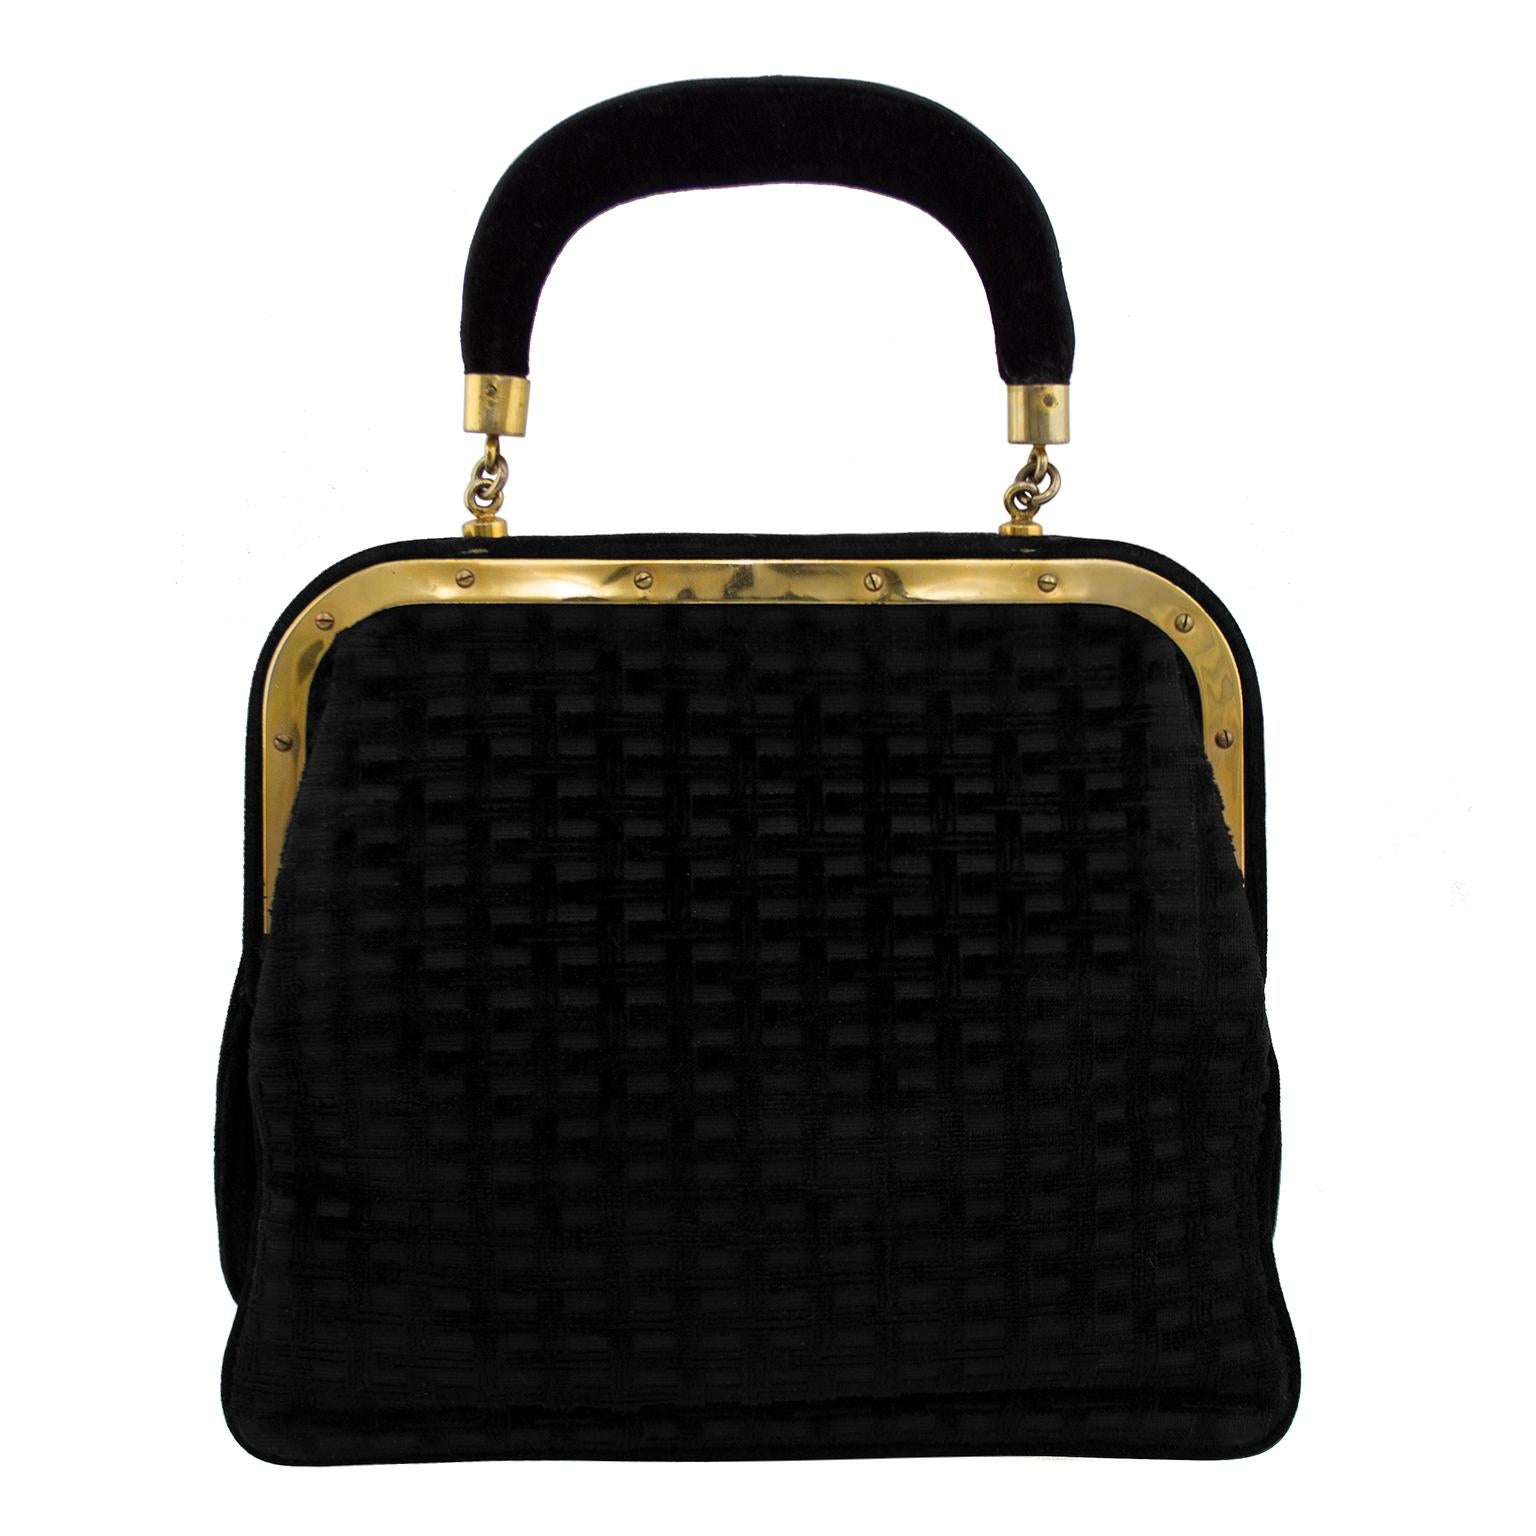 Classic style Roberta di Camerino top handle lady bag. The black textured velvet exterior is on a yellow gold frame that closes at the top with a turn ring. Lined in bright red leather, the interior is free of any stains and the bag has a unique